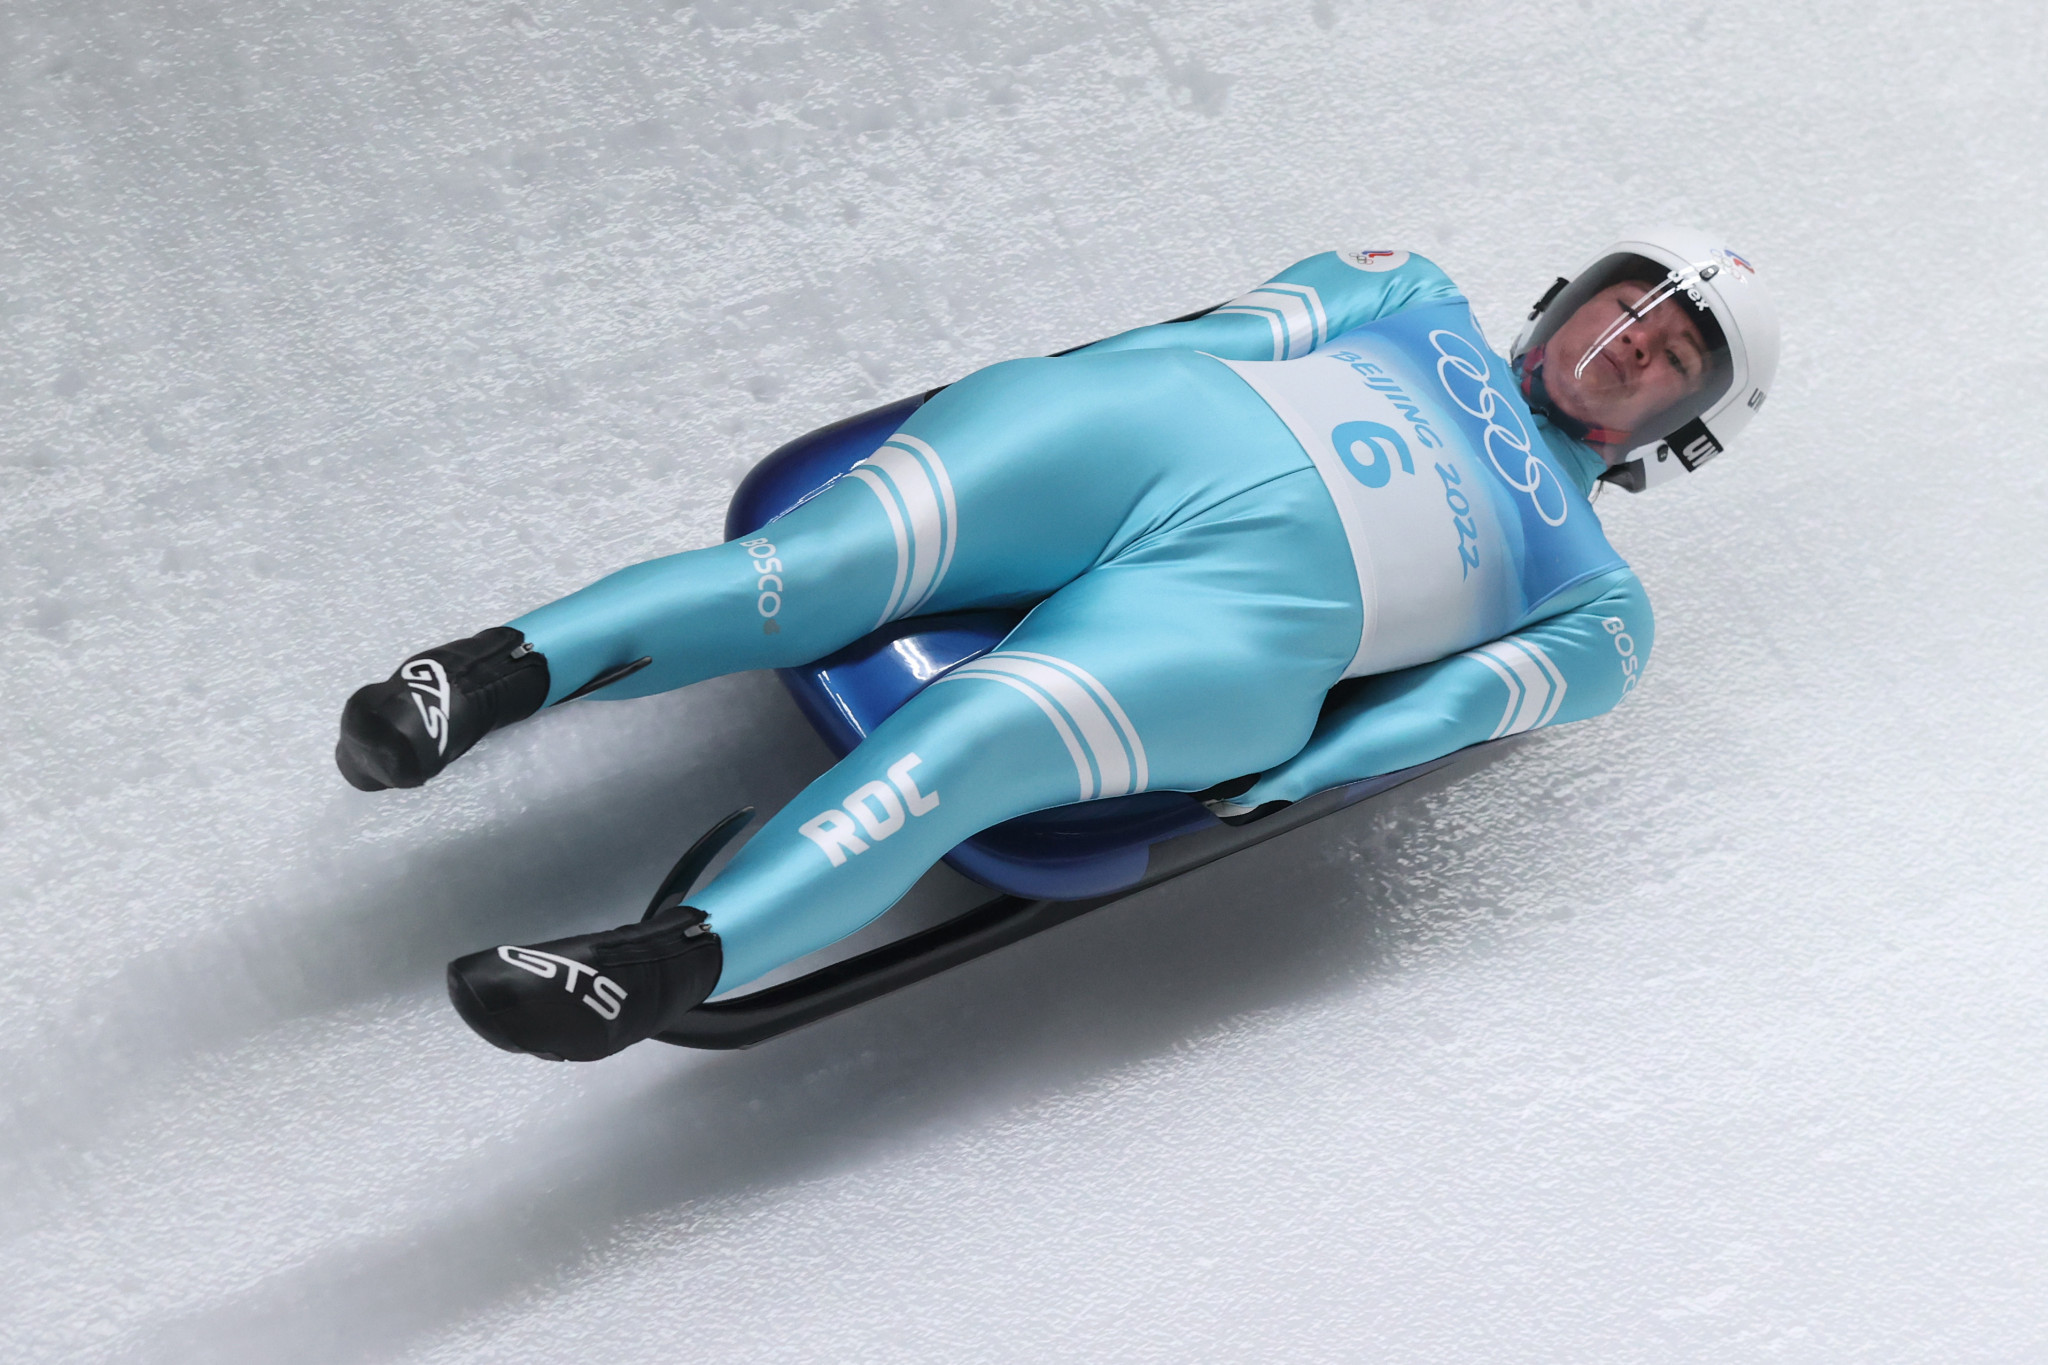 Russian athletes including Olympic silver medallist Tatiana Ivanova have been banned from International Luge Federation competitions ©Getty Images